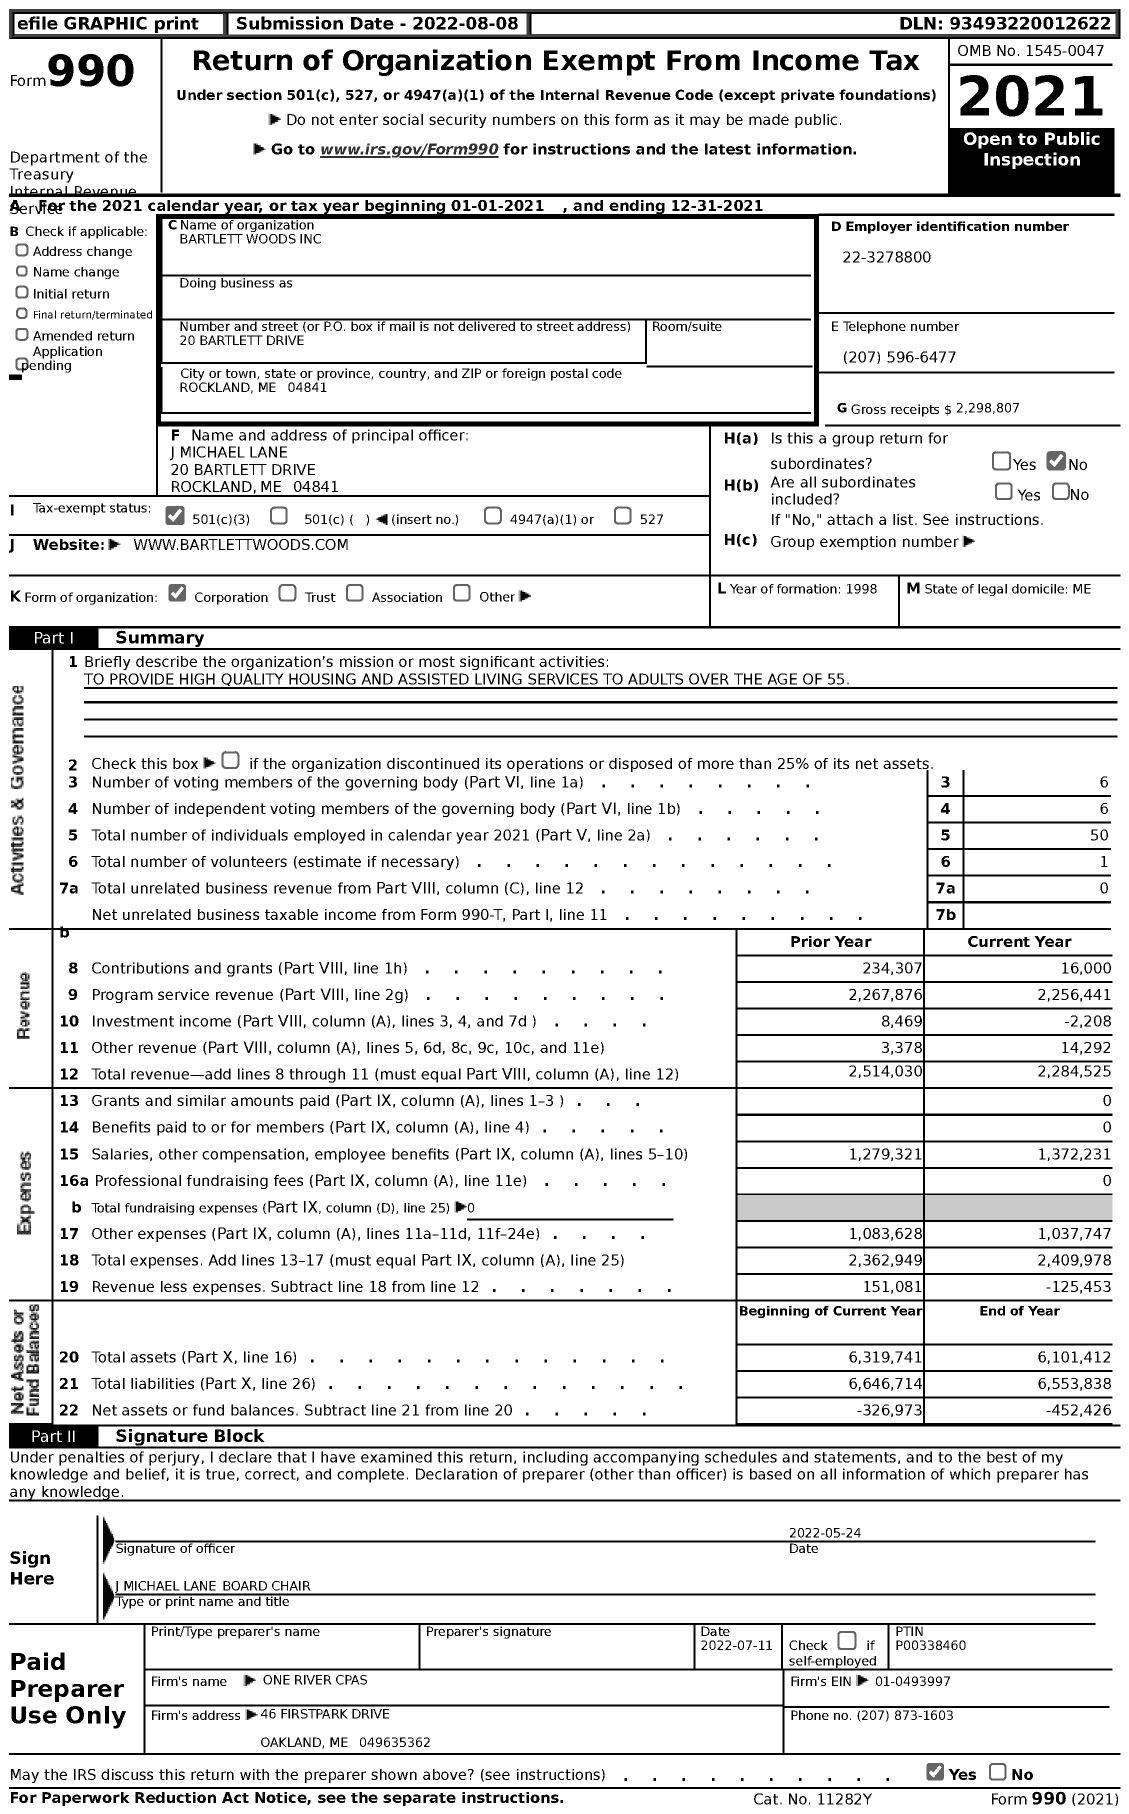 Image of first page of 2021 Form 990 for Bartlett Woods